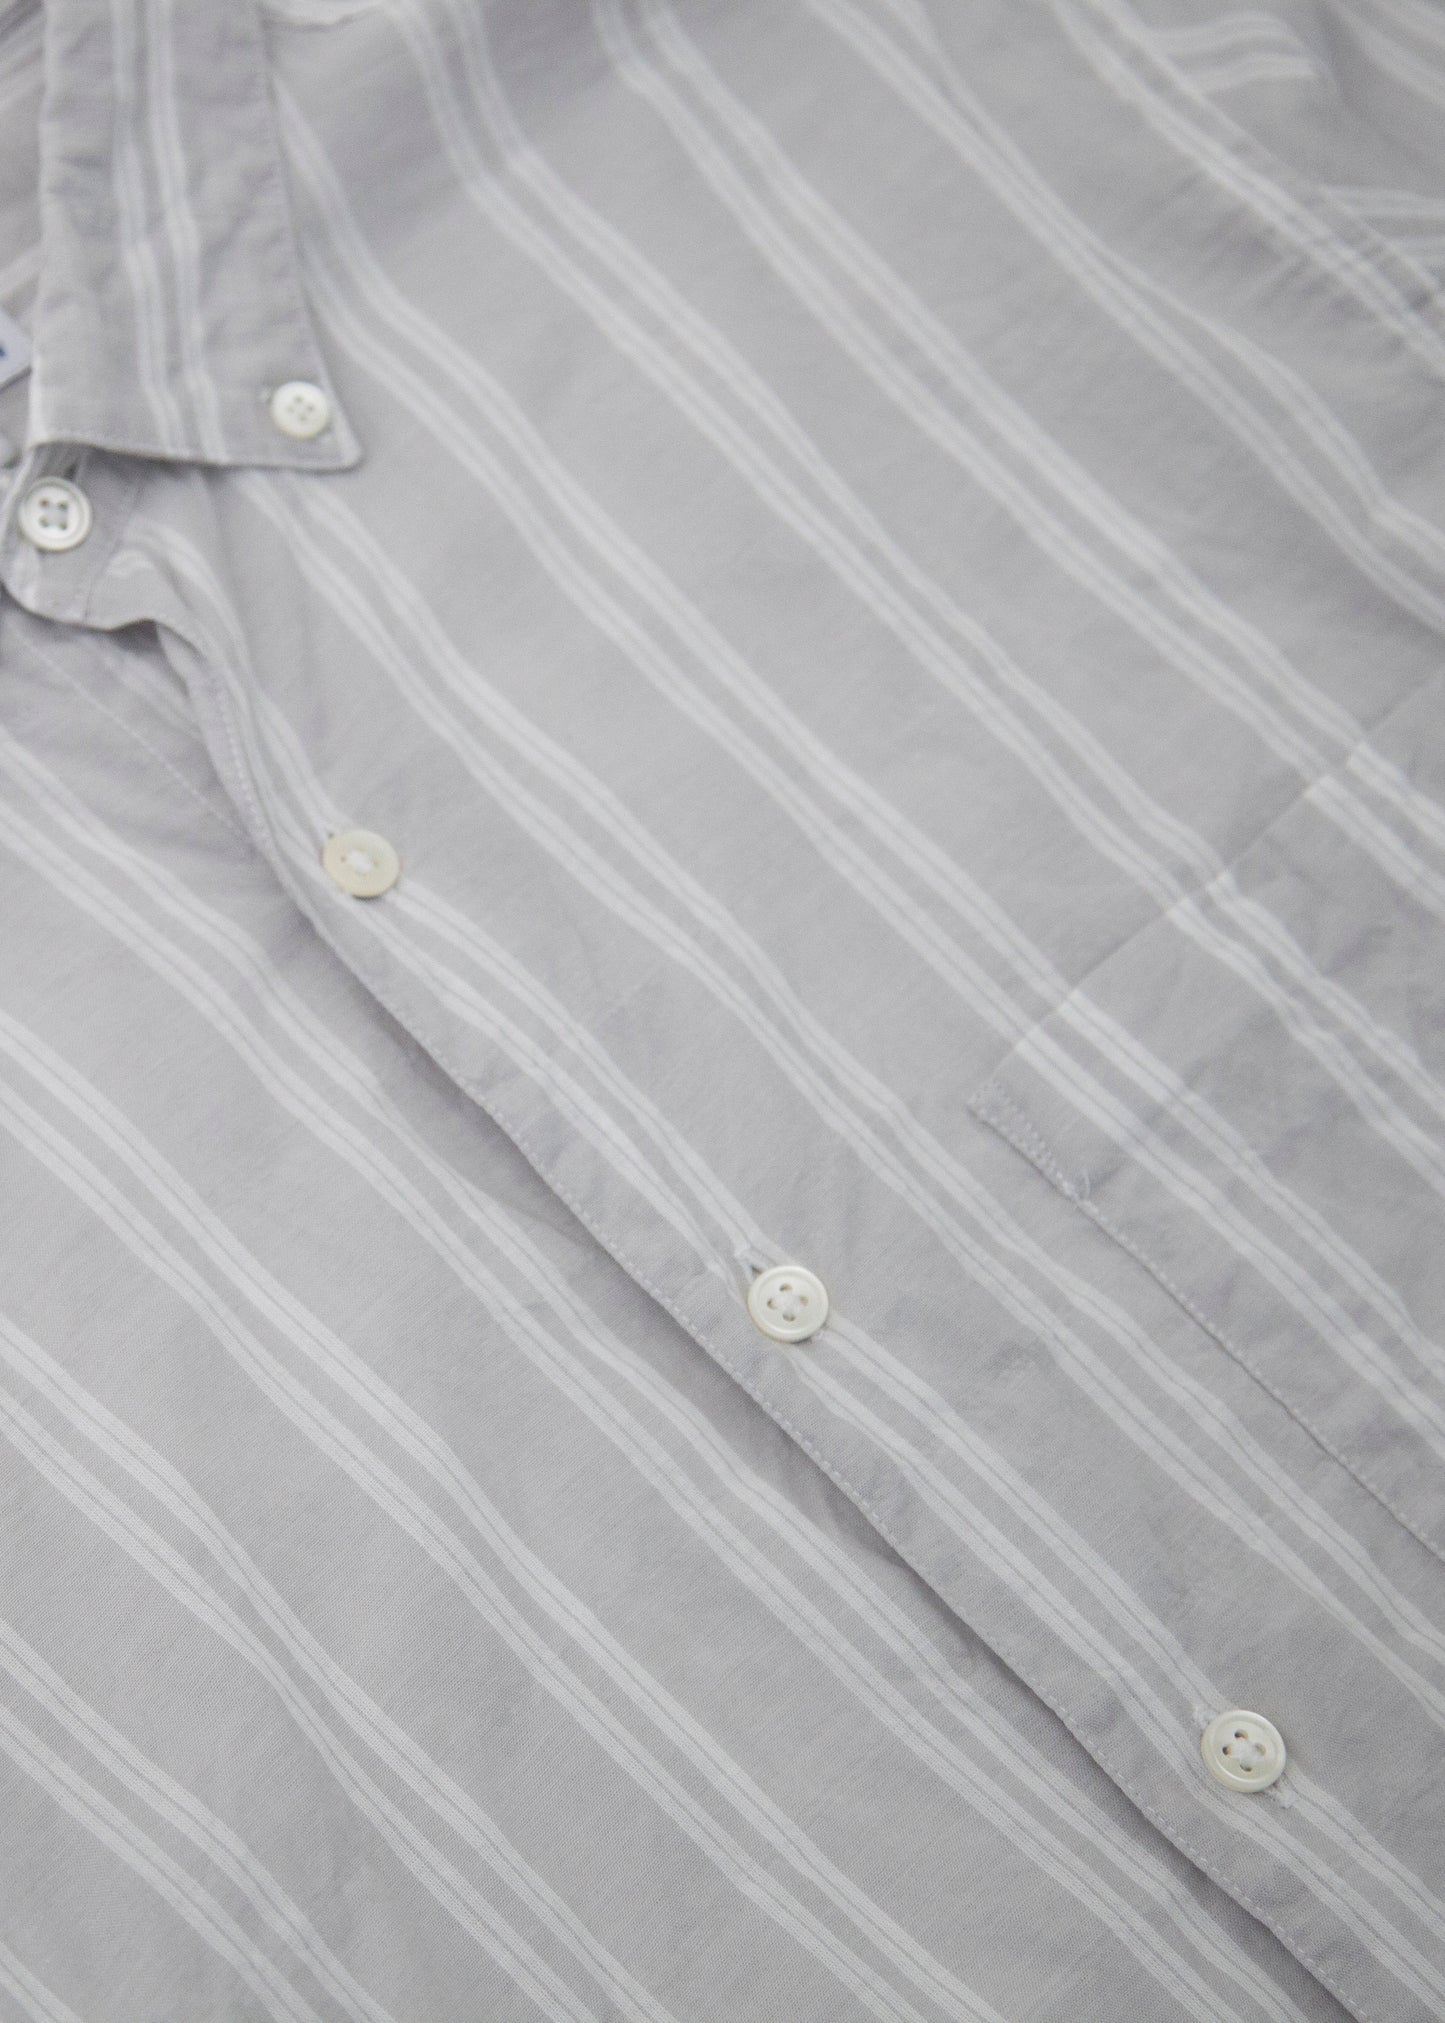 Close up of the single needle shirt in color cream fabric and buttons